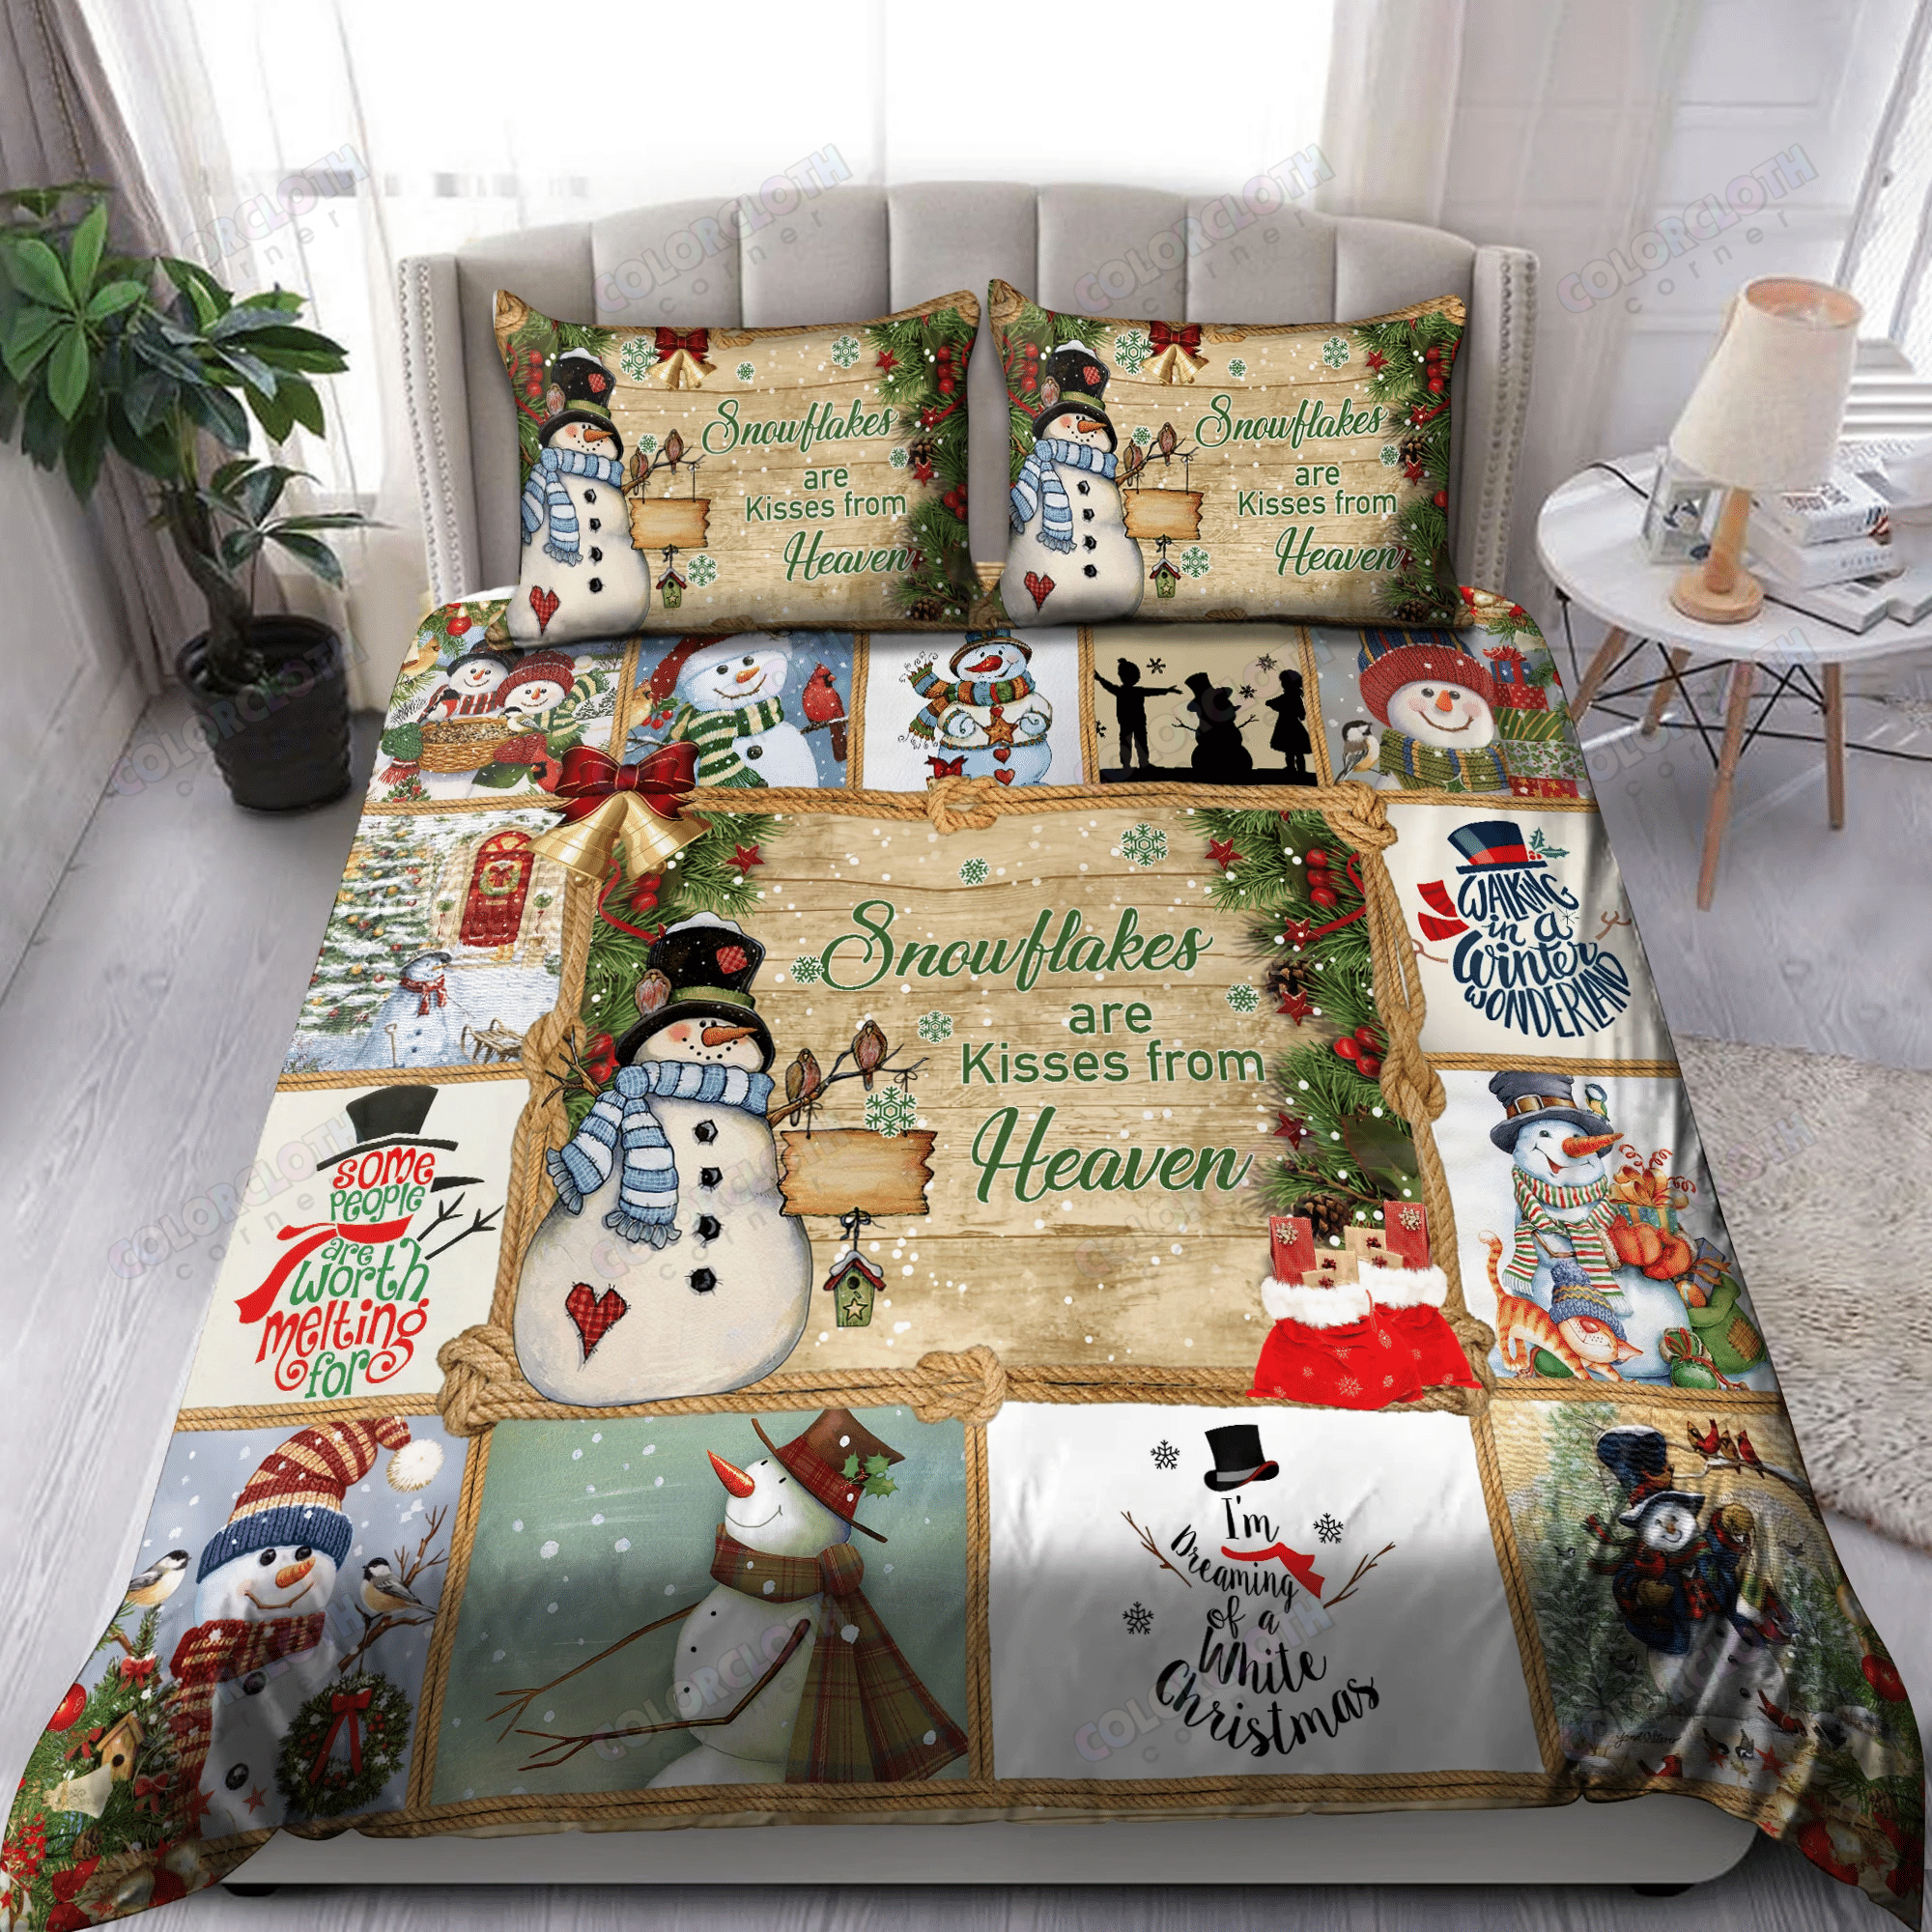 Snowman Snow flakes are kisses from heaven Merry Christmas Bedding Set